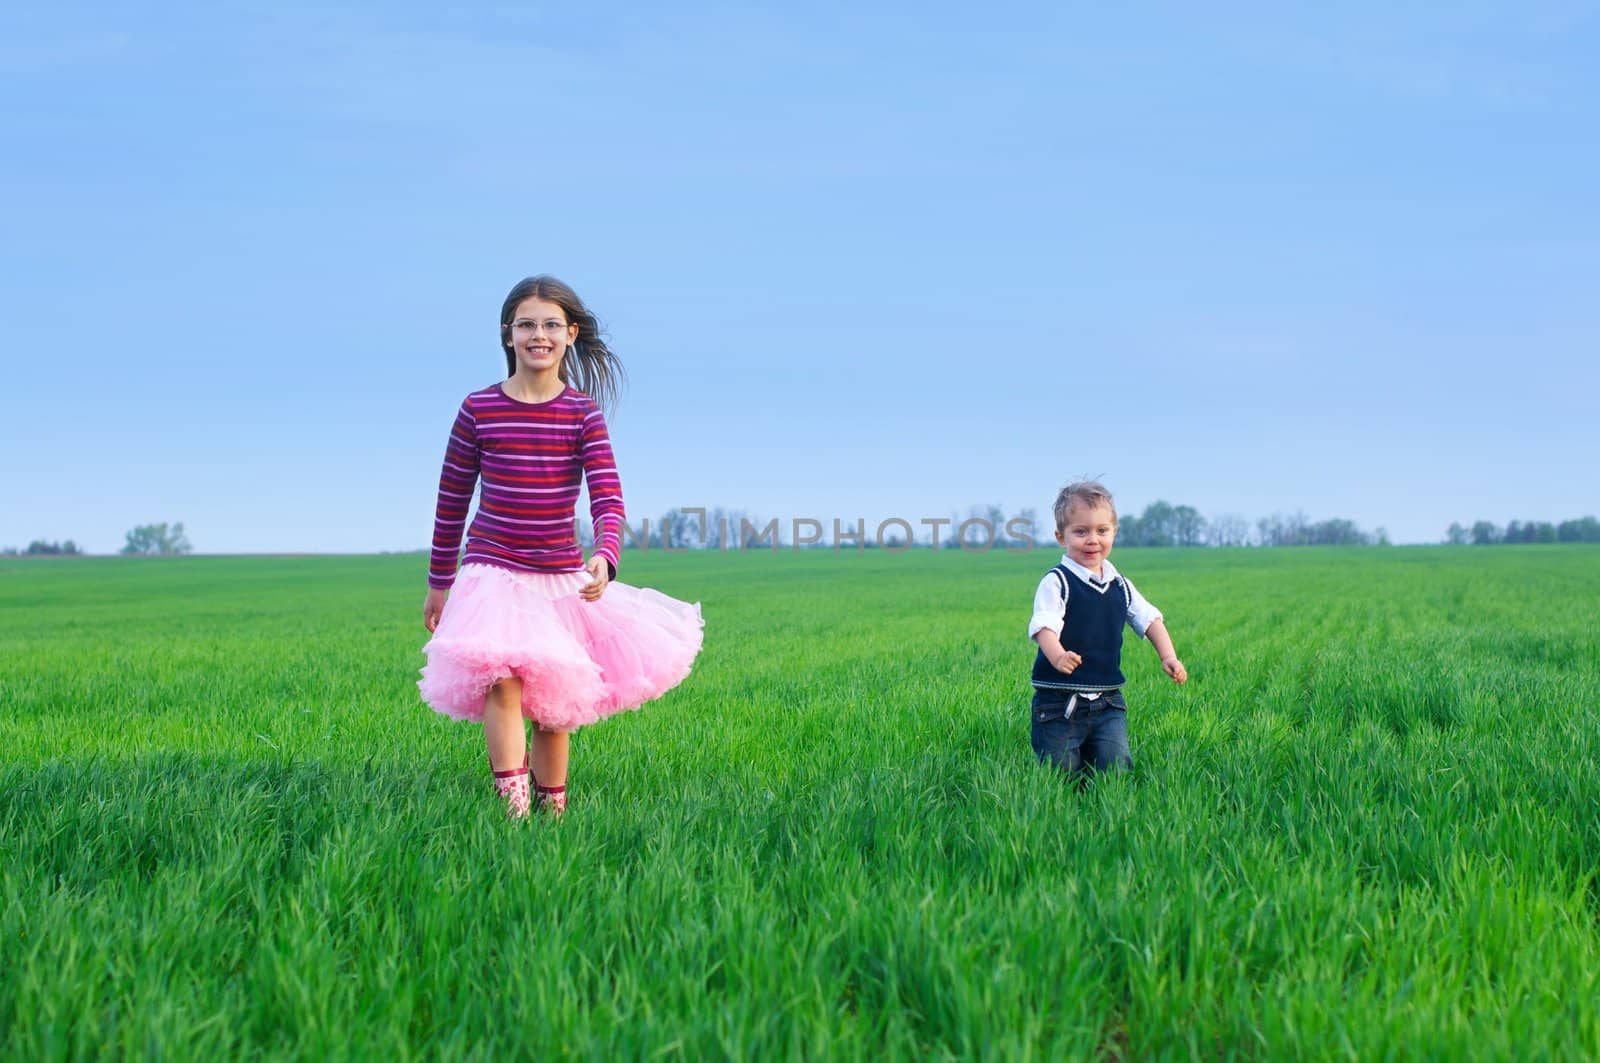 A beautiful sister runing with her cute little brather on the grass